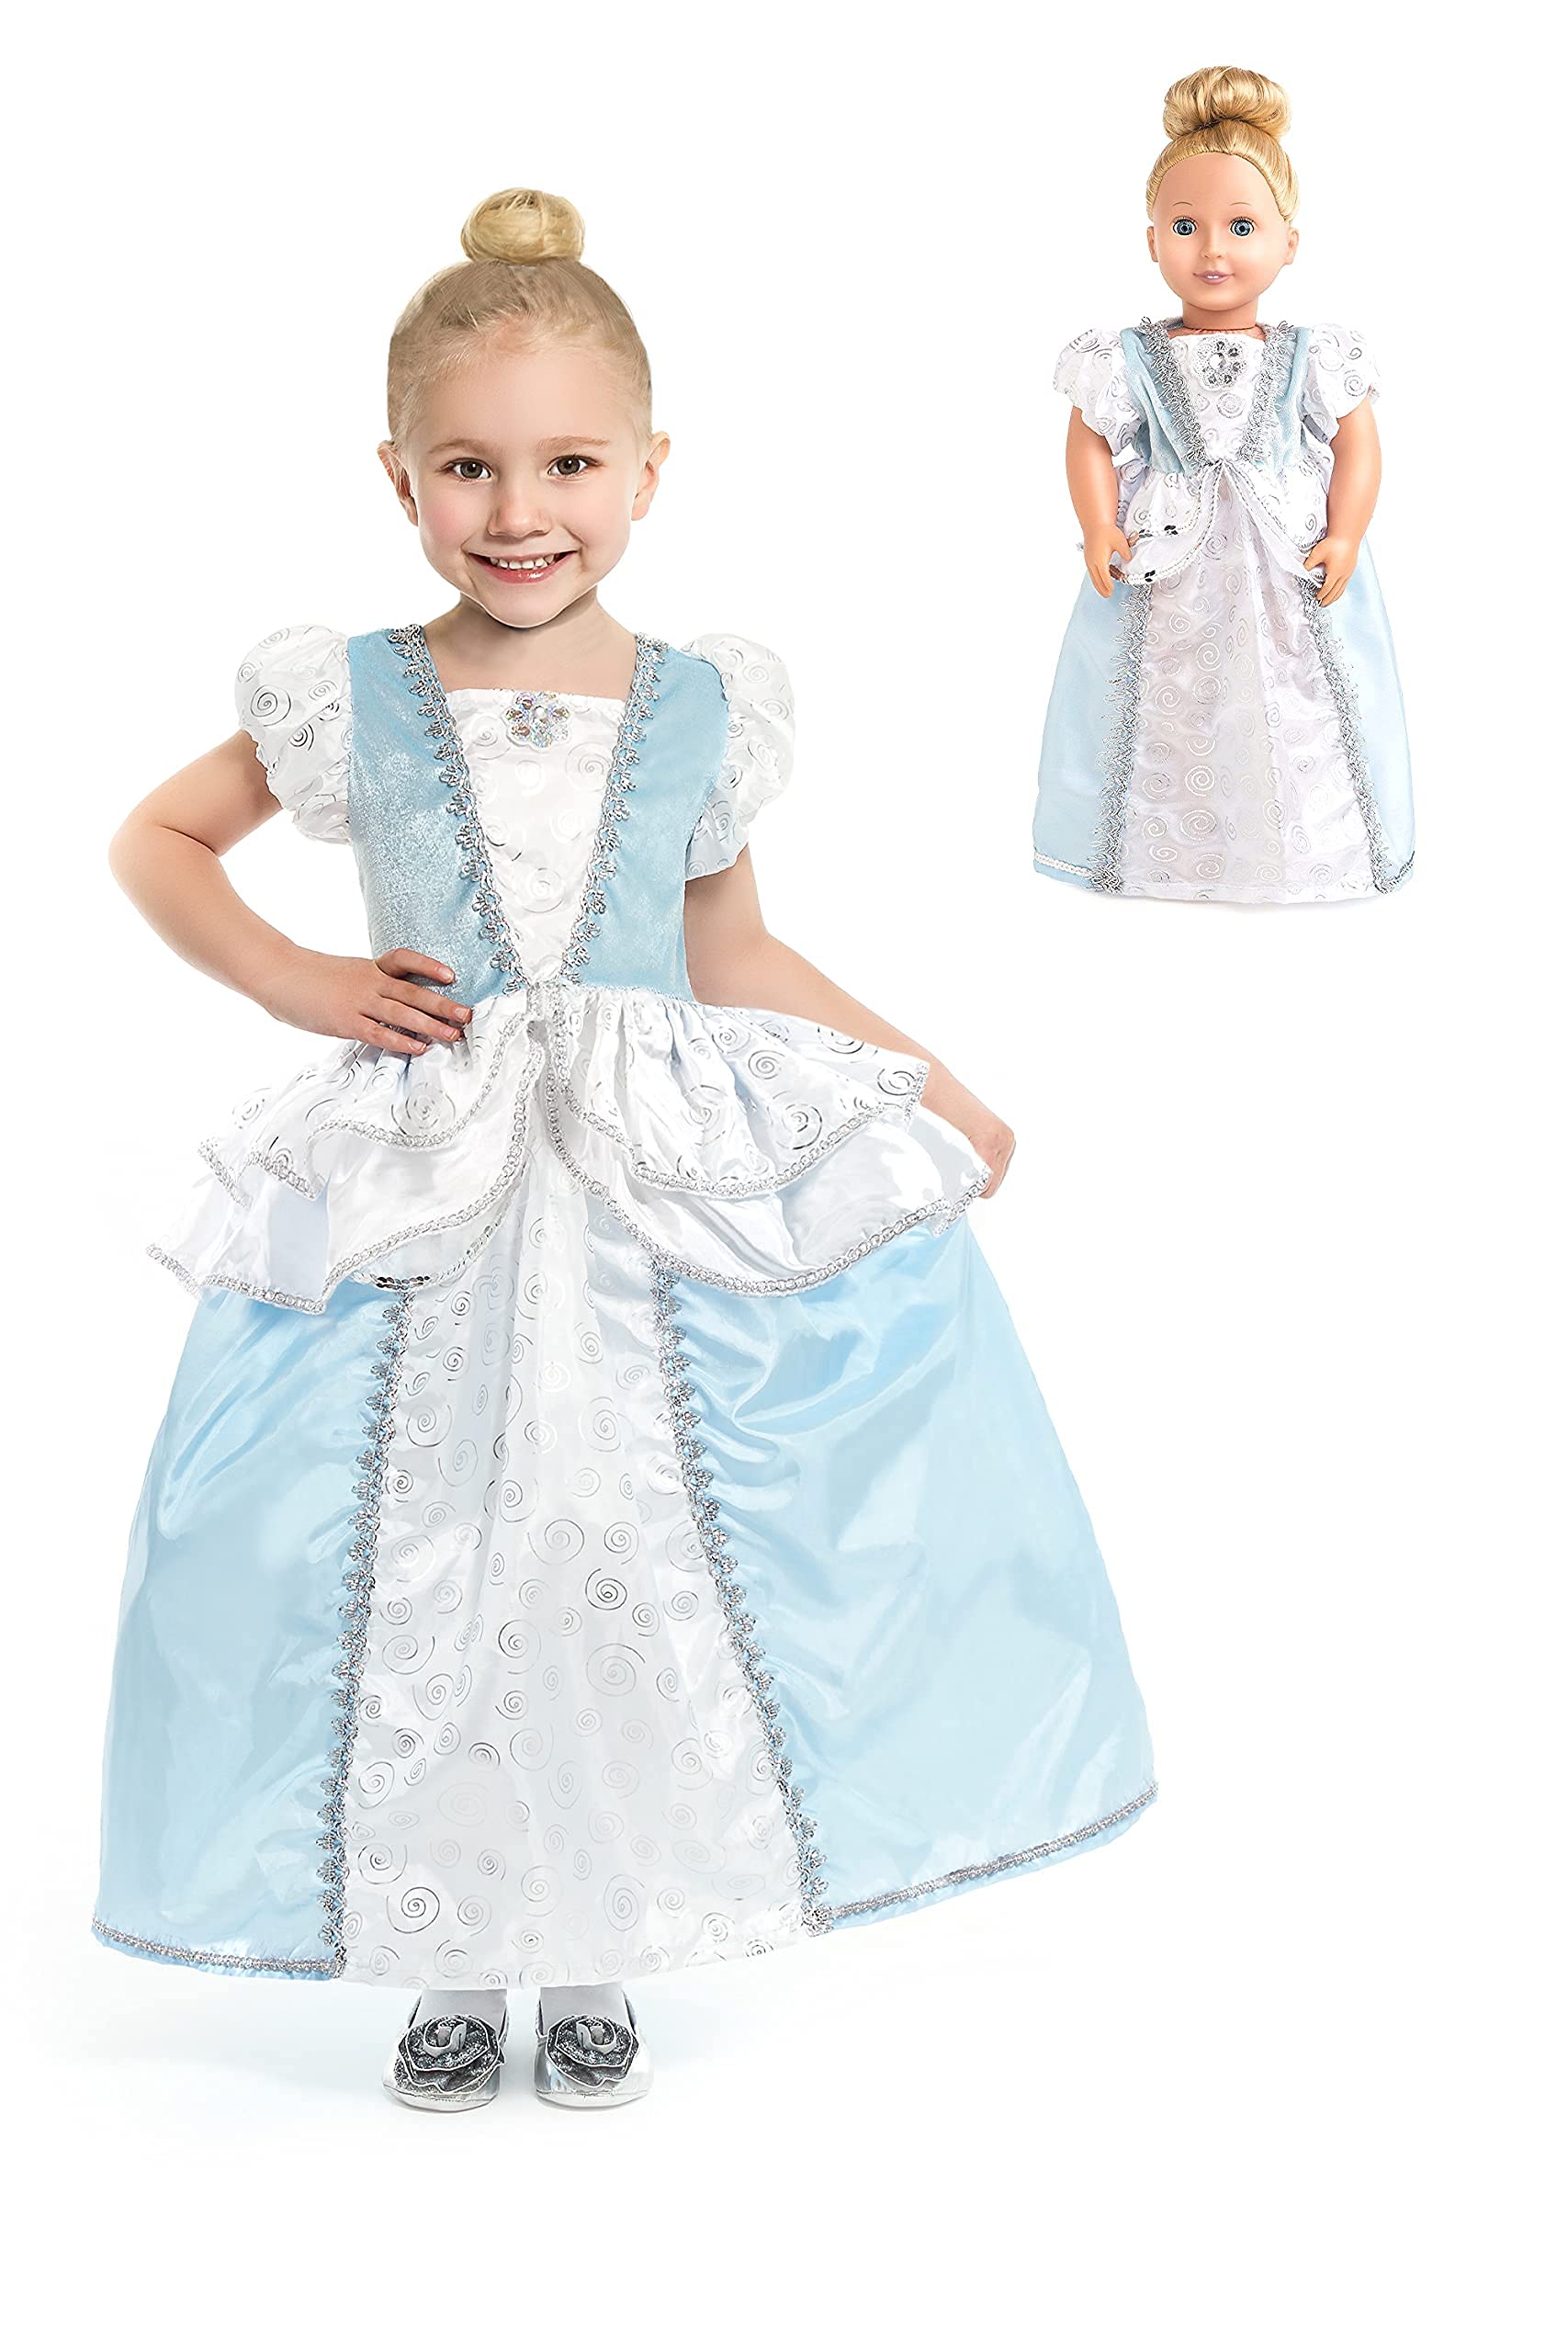 Little Adventures Cinderella Princess Dress Up Costume (X-Large Age 7-9) with Matching Doll Dress - Machine Washable Child Pretend Play and Party Dress with No Glitter